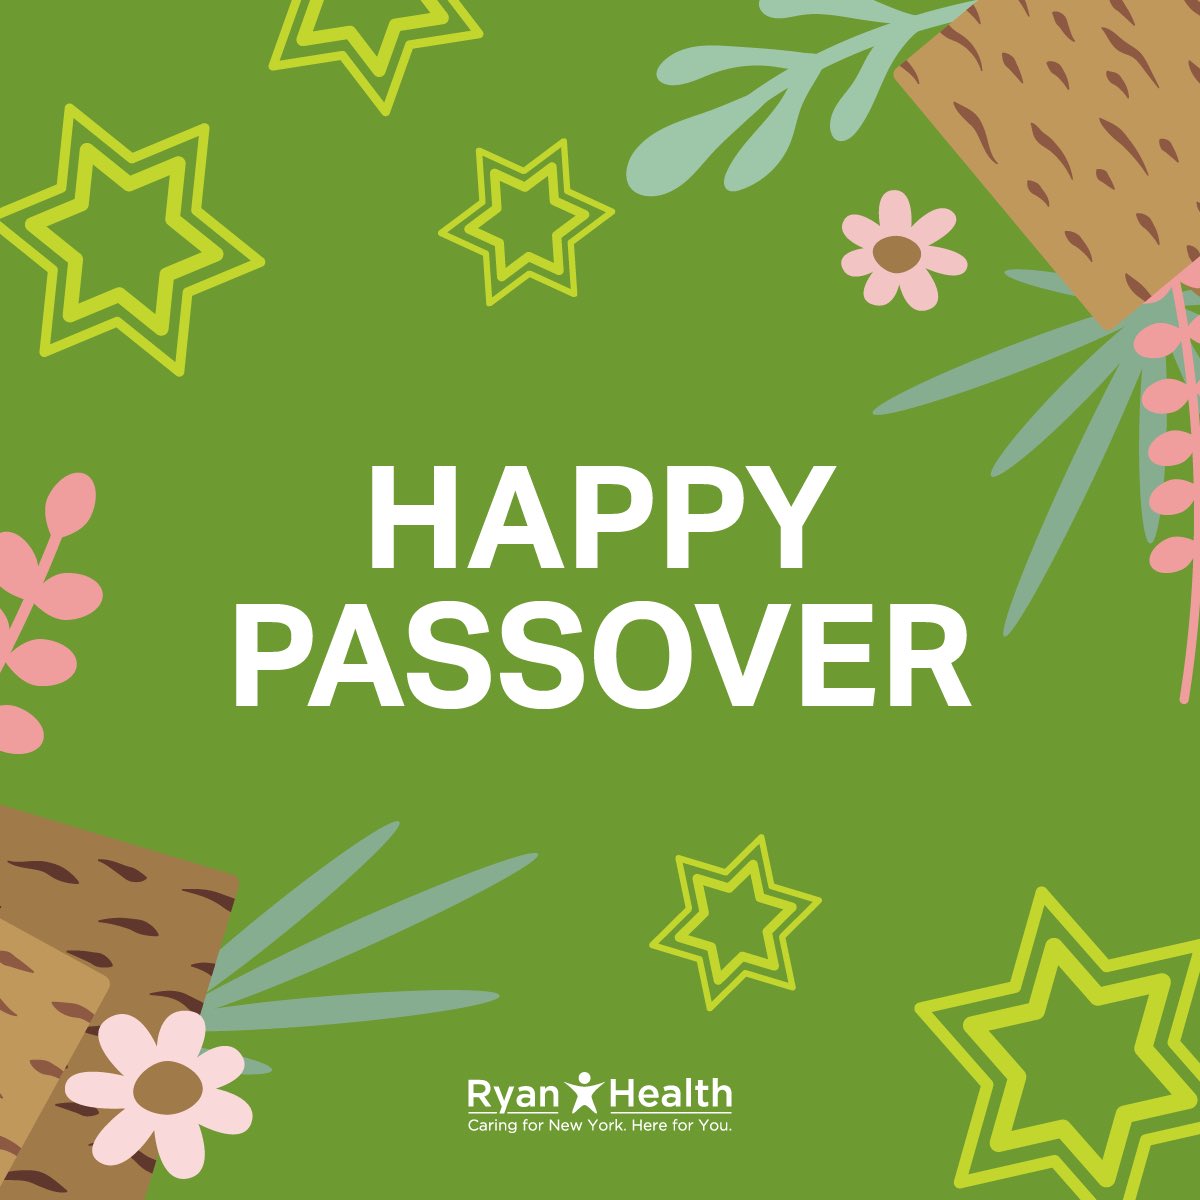 Chag Sameach! We're wishing our Ryan Health community a beautiful Passover! May you find warmth, comfort, and goodness each and every day.